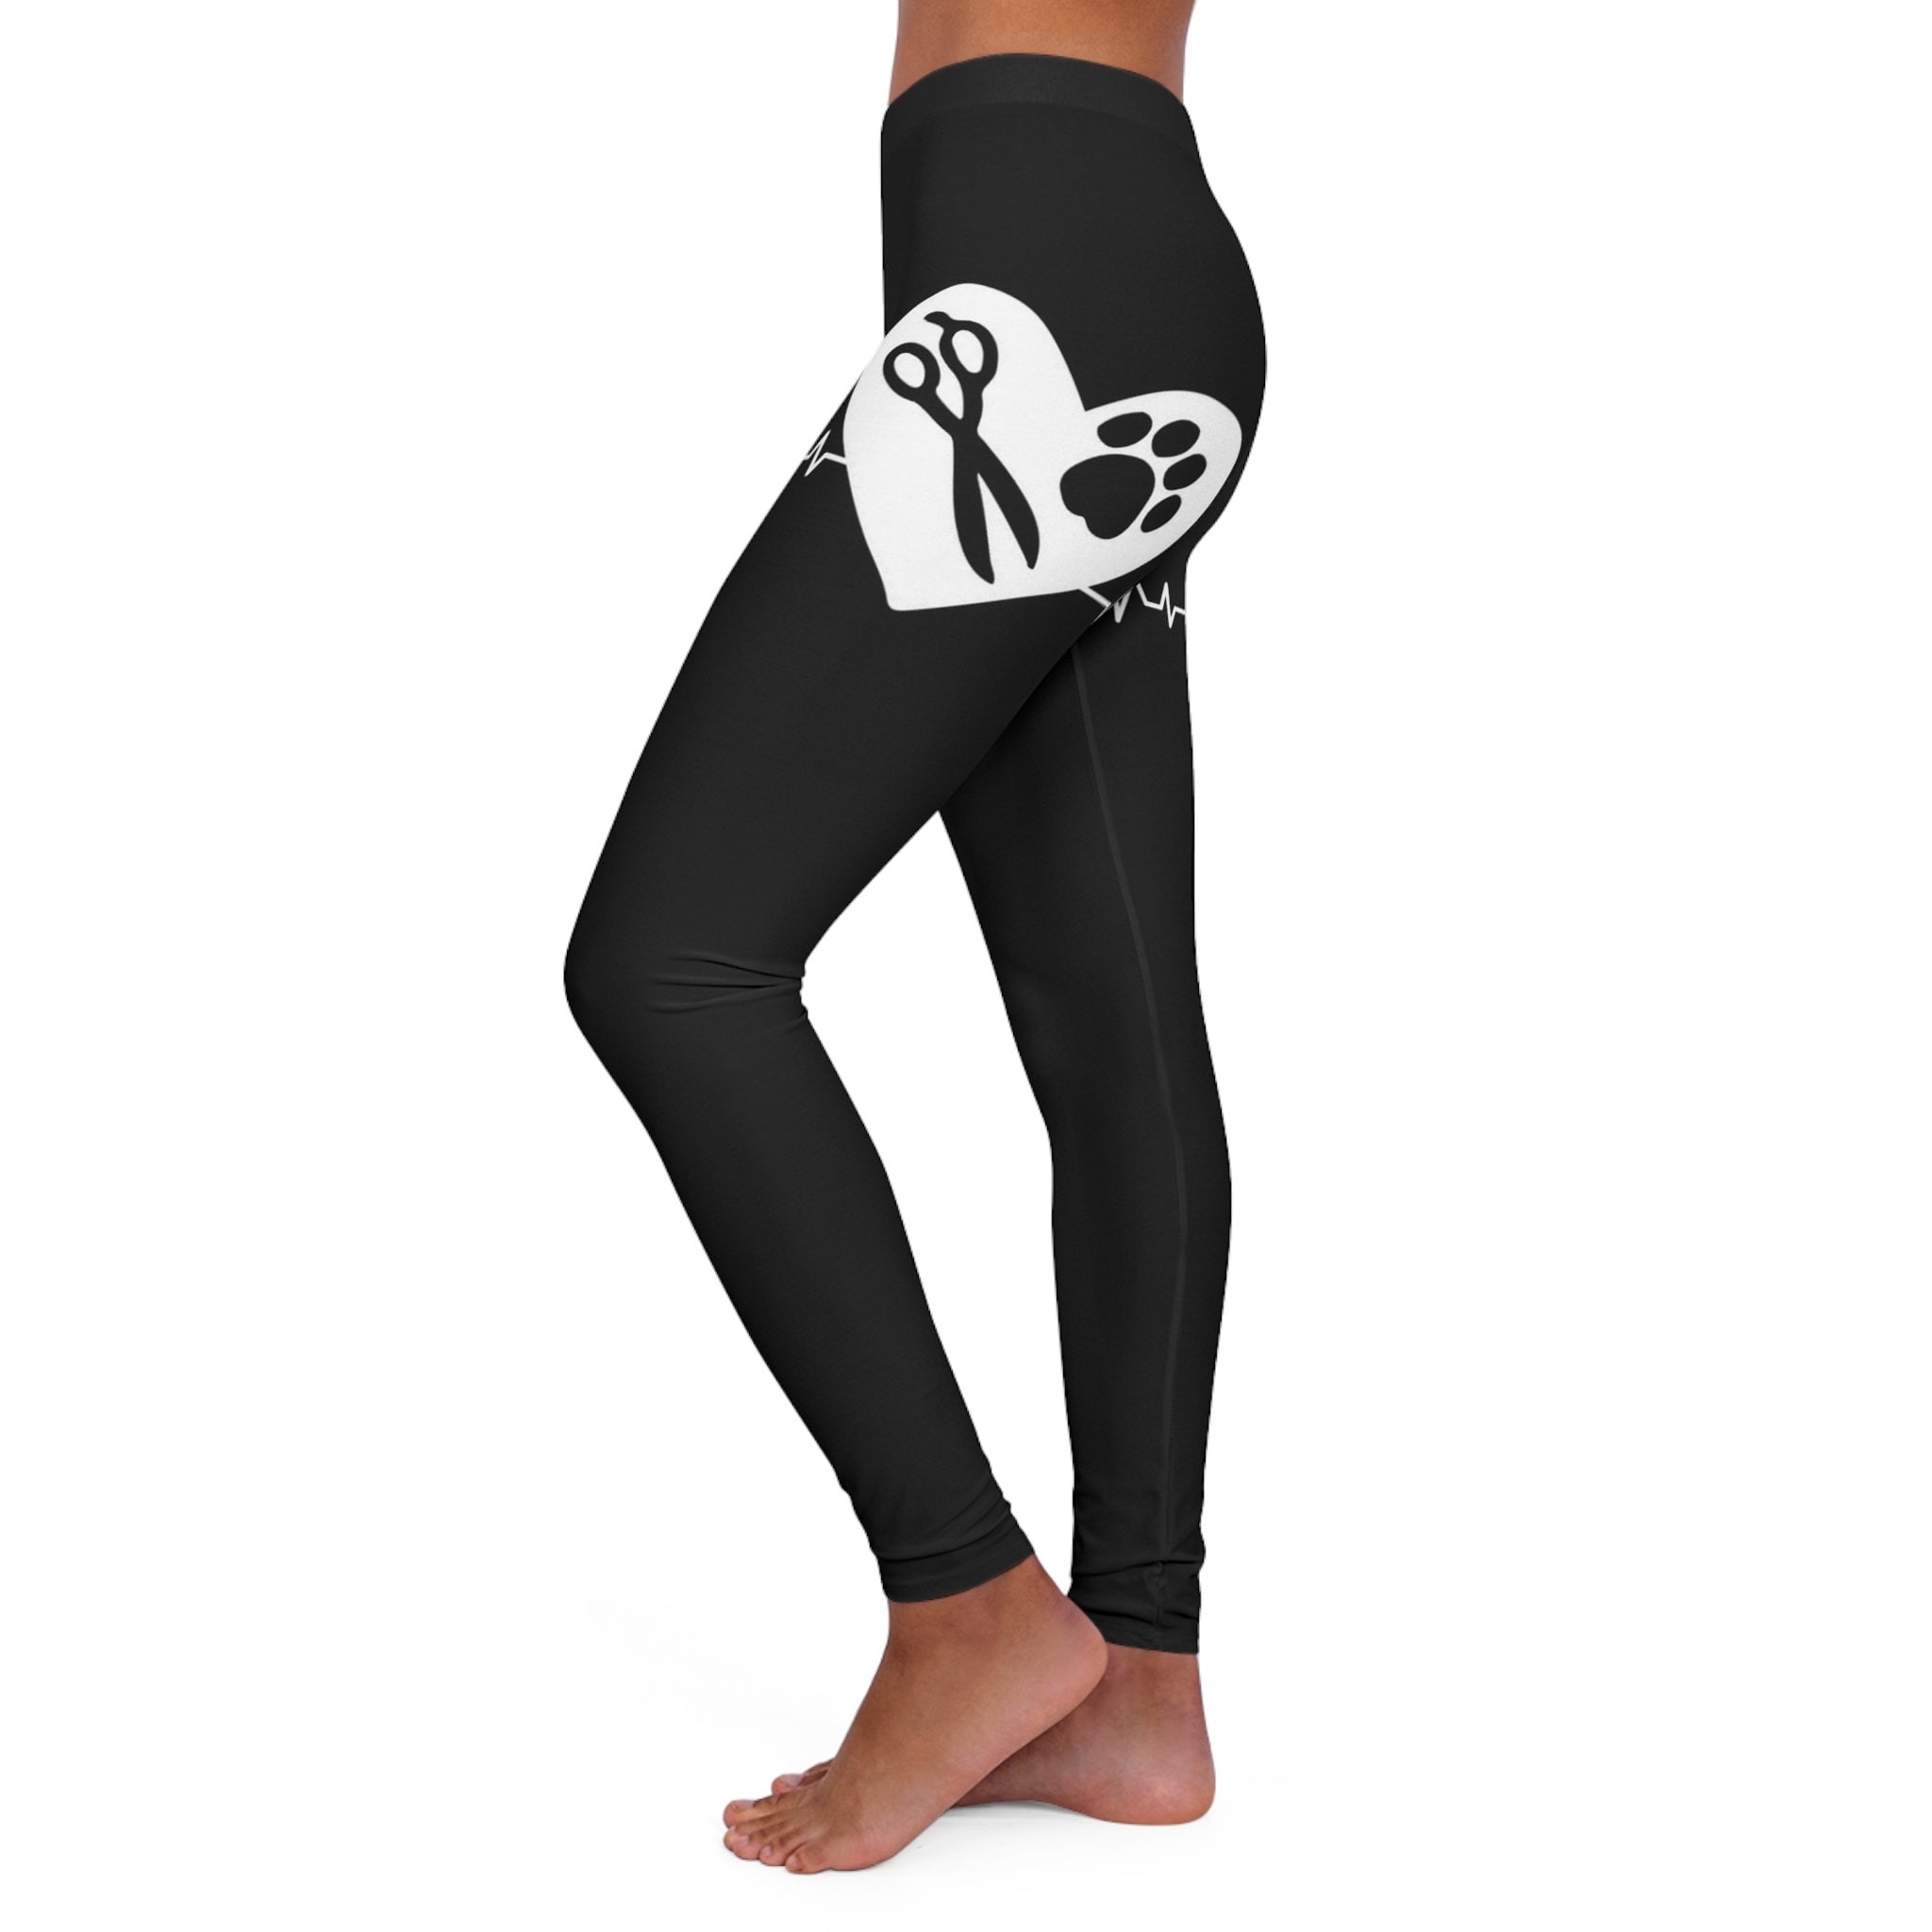 CPC Leggings are perfect apparel for pet grooming professionals